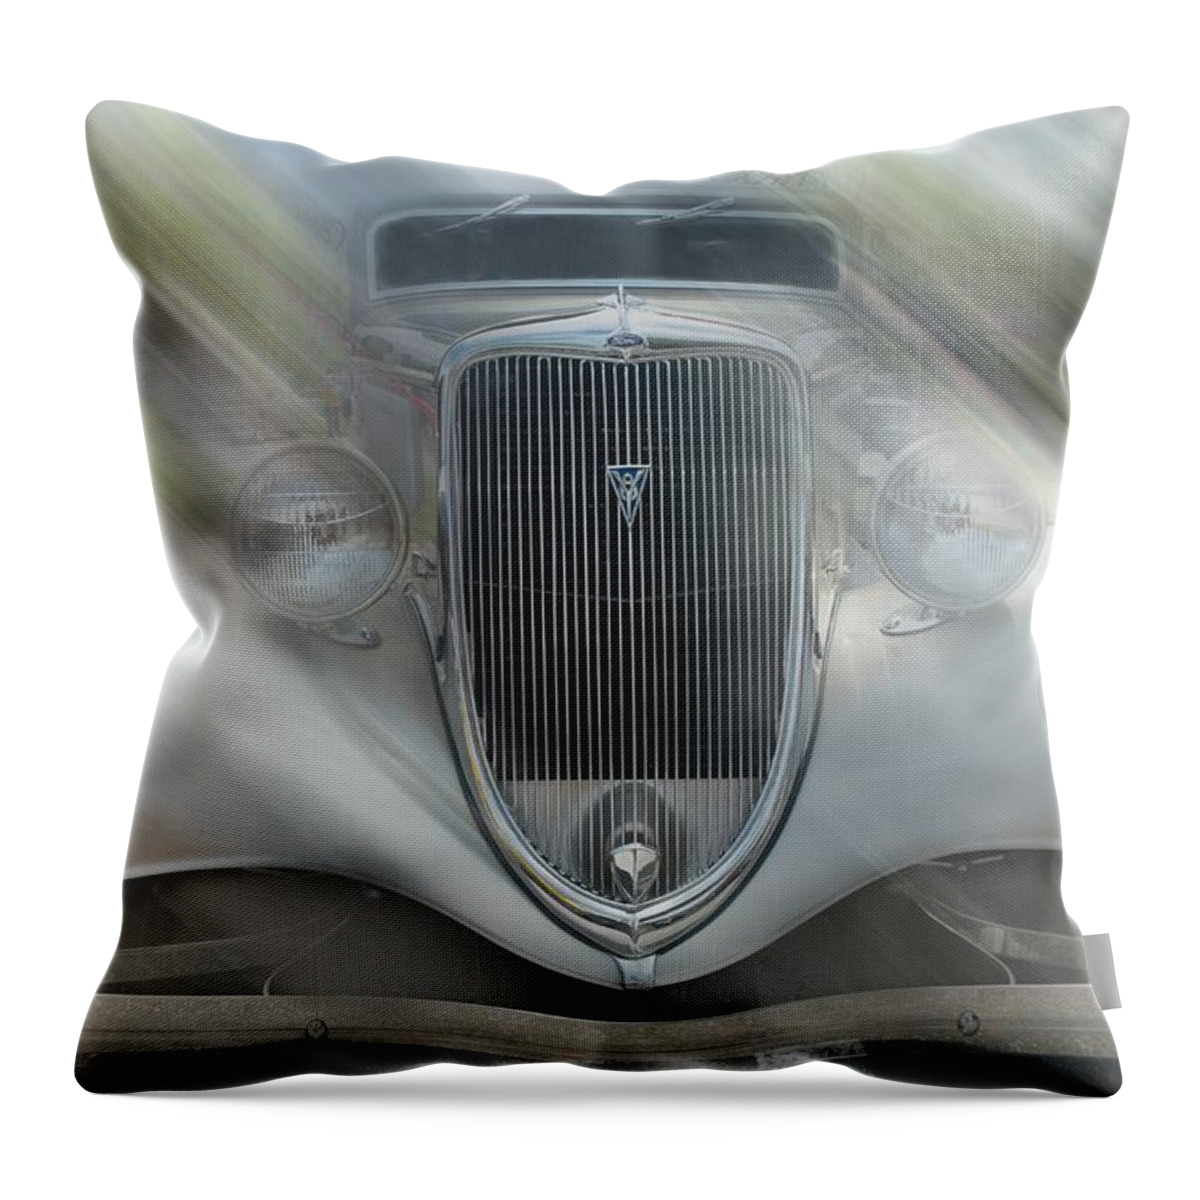 1934 Ford Coupe #automobile #automotive Car Show# Cars# Classic #classic Car #ford# Old #retro# Transportation #vintage #1934 Ford Coupe Throw Pillow featuring the photograph 1934 Ford Coupe by Louis Ferreira